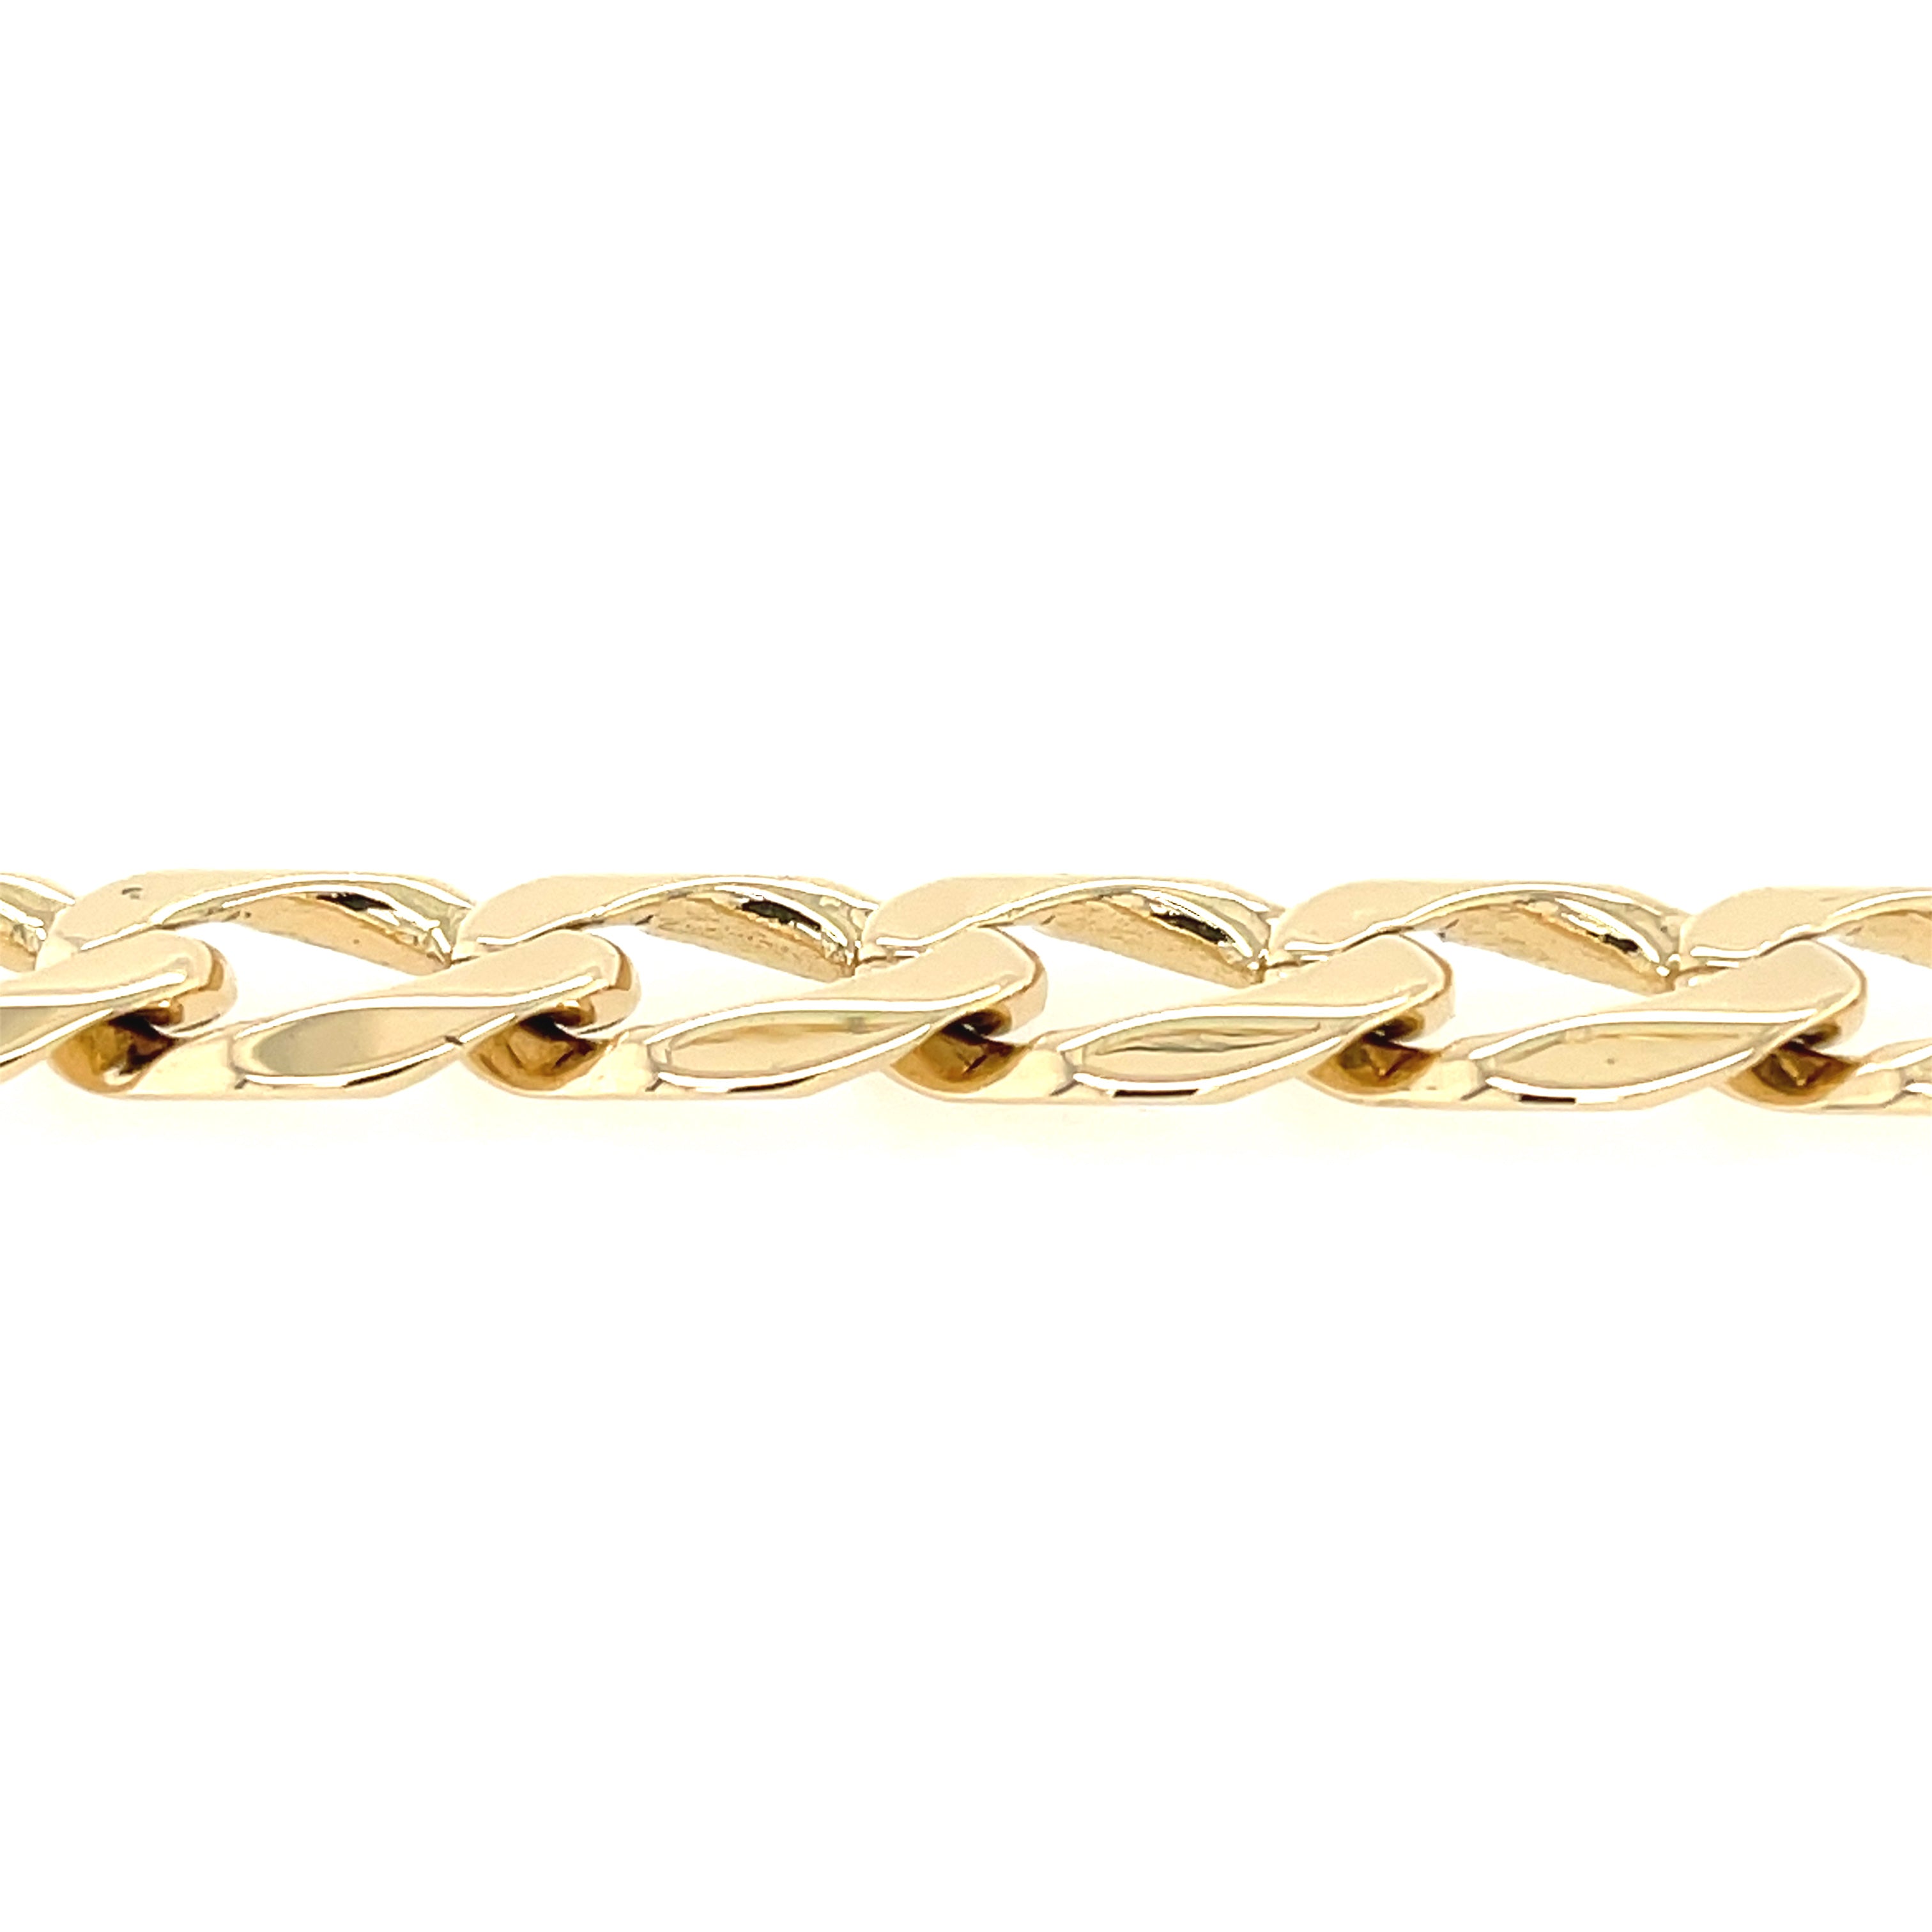 9ct Yellow Gold 9.5"Inch Curb Link Bracelet - 33.96g